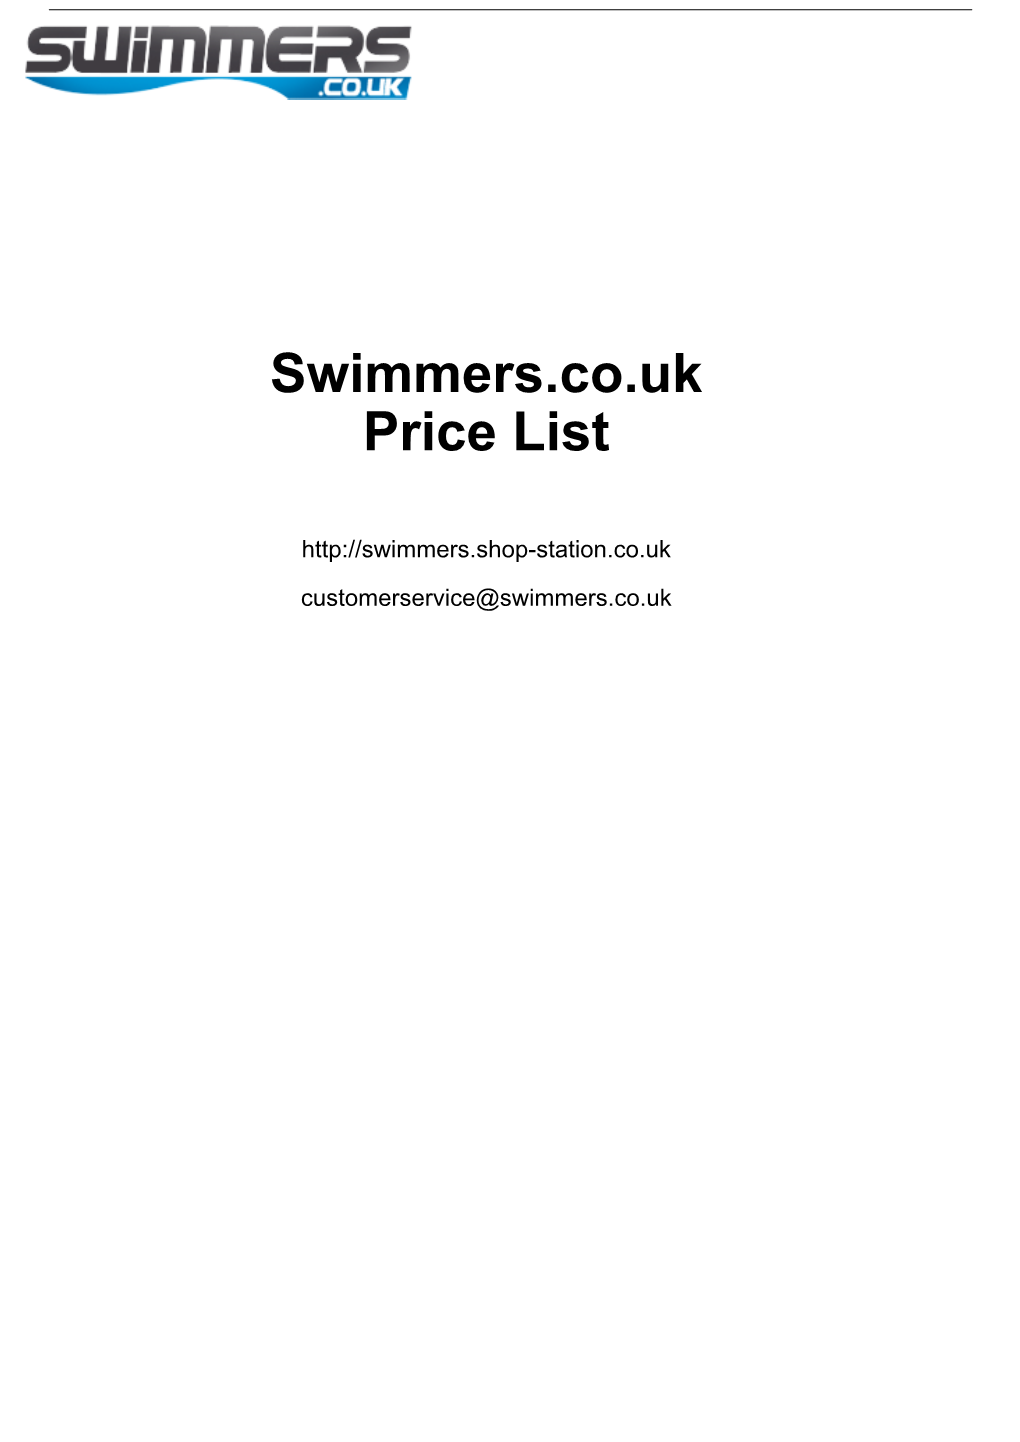 Swimmers.Co.Uk Price List